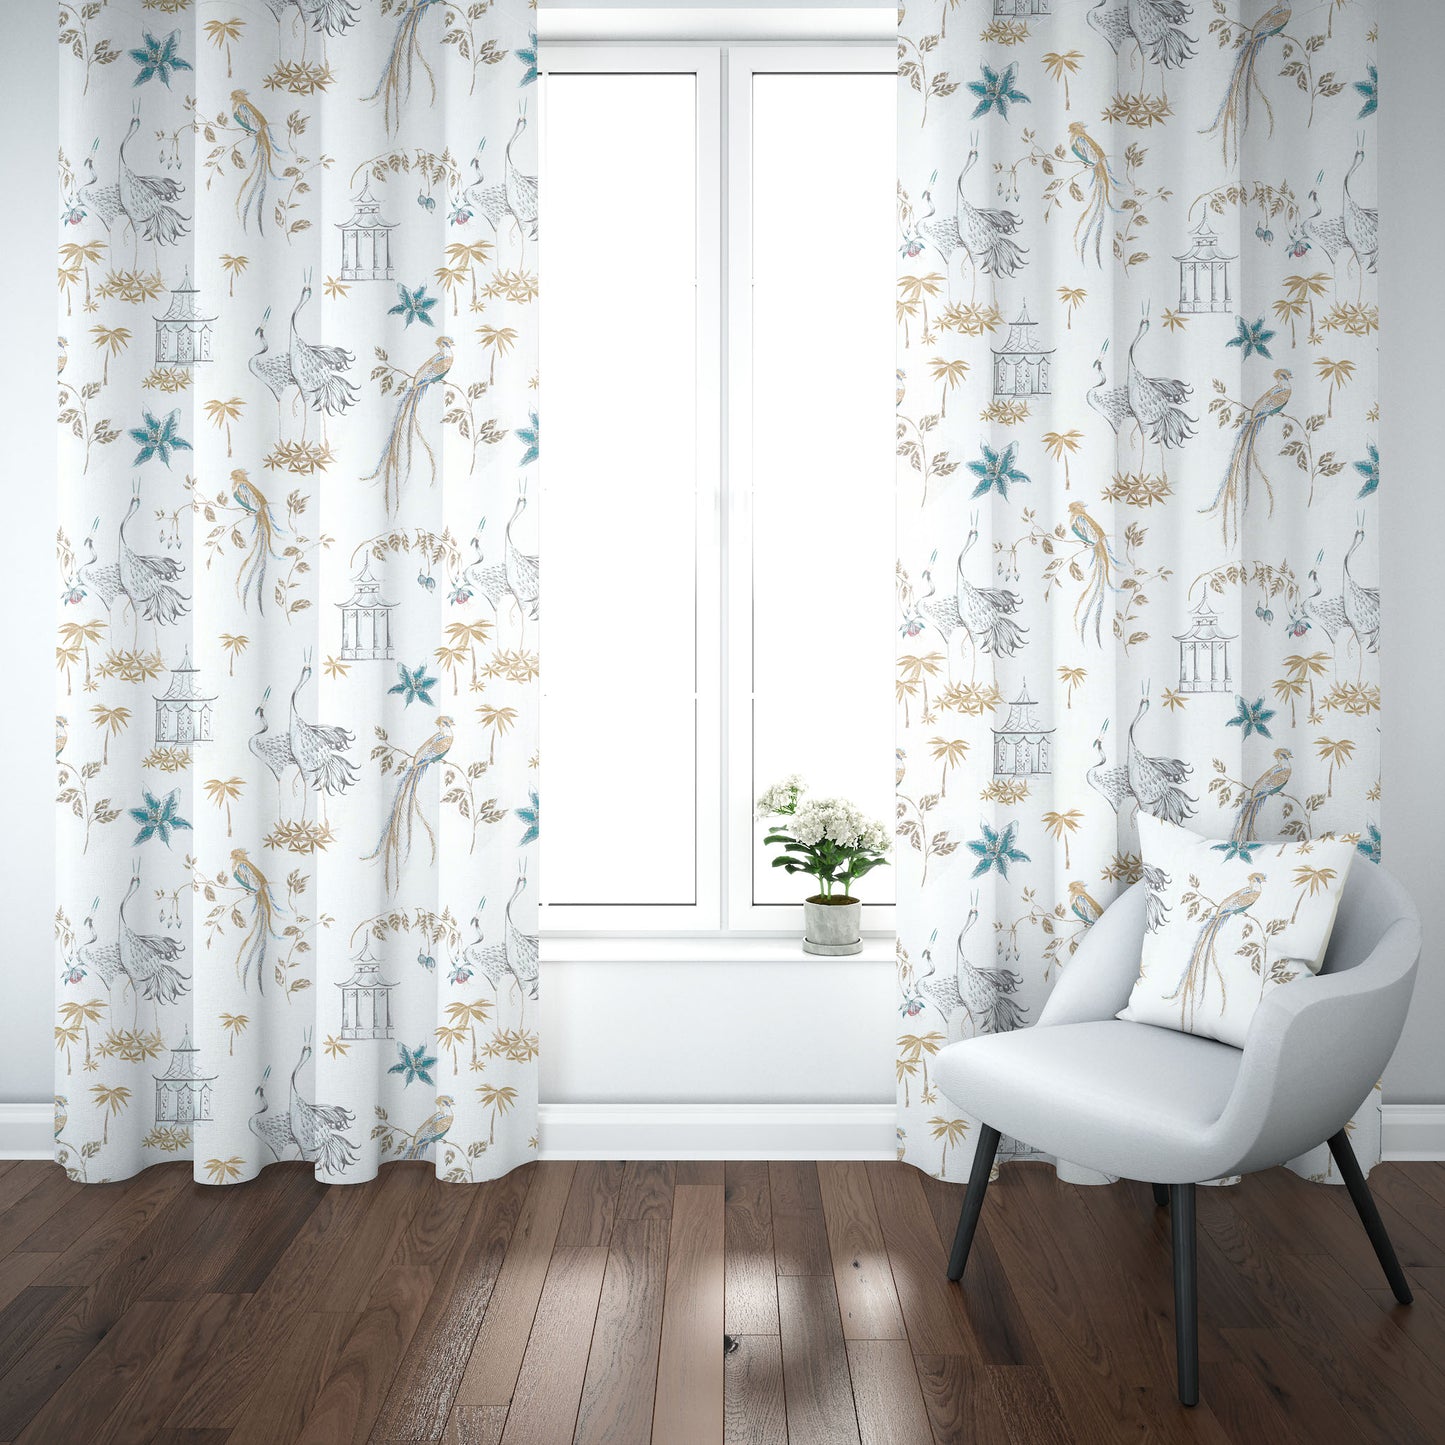 Tab Top Curtain Panels Pair in Let It Crane Aegean Blue Oriental Toile, Multicolor Chinoiserie